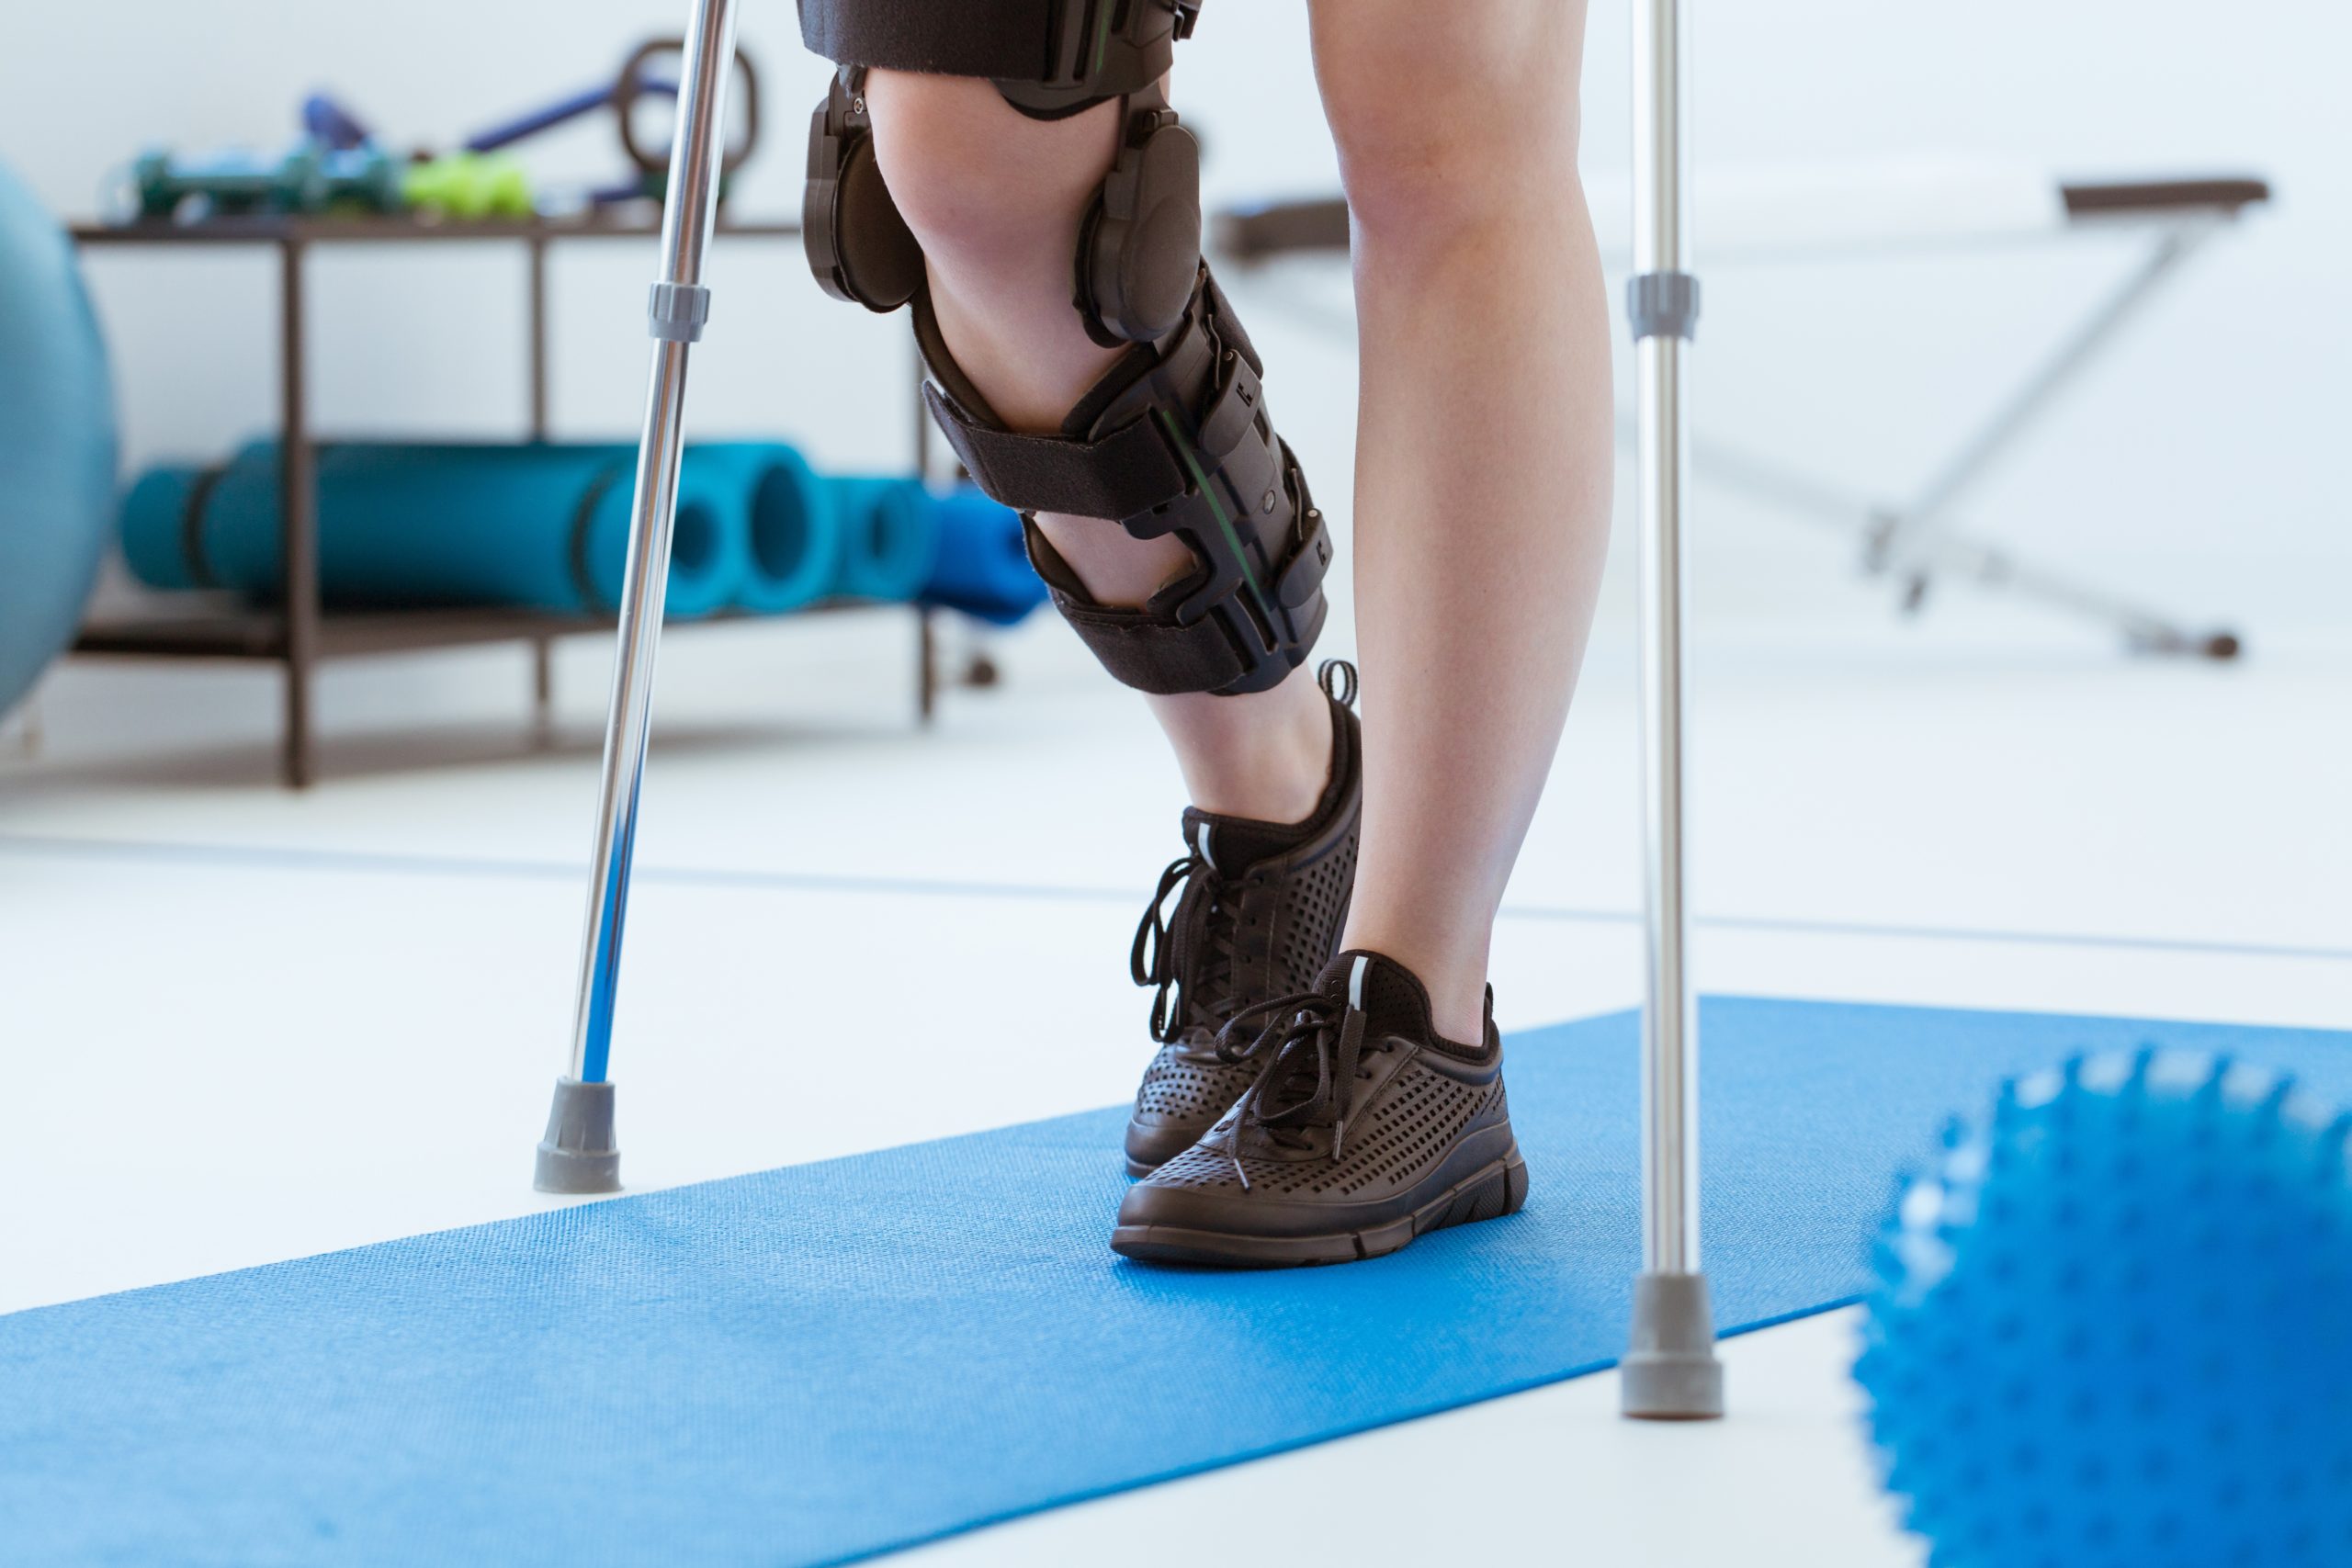 Injured patient walking with brace